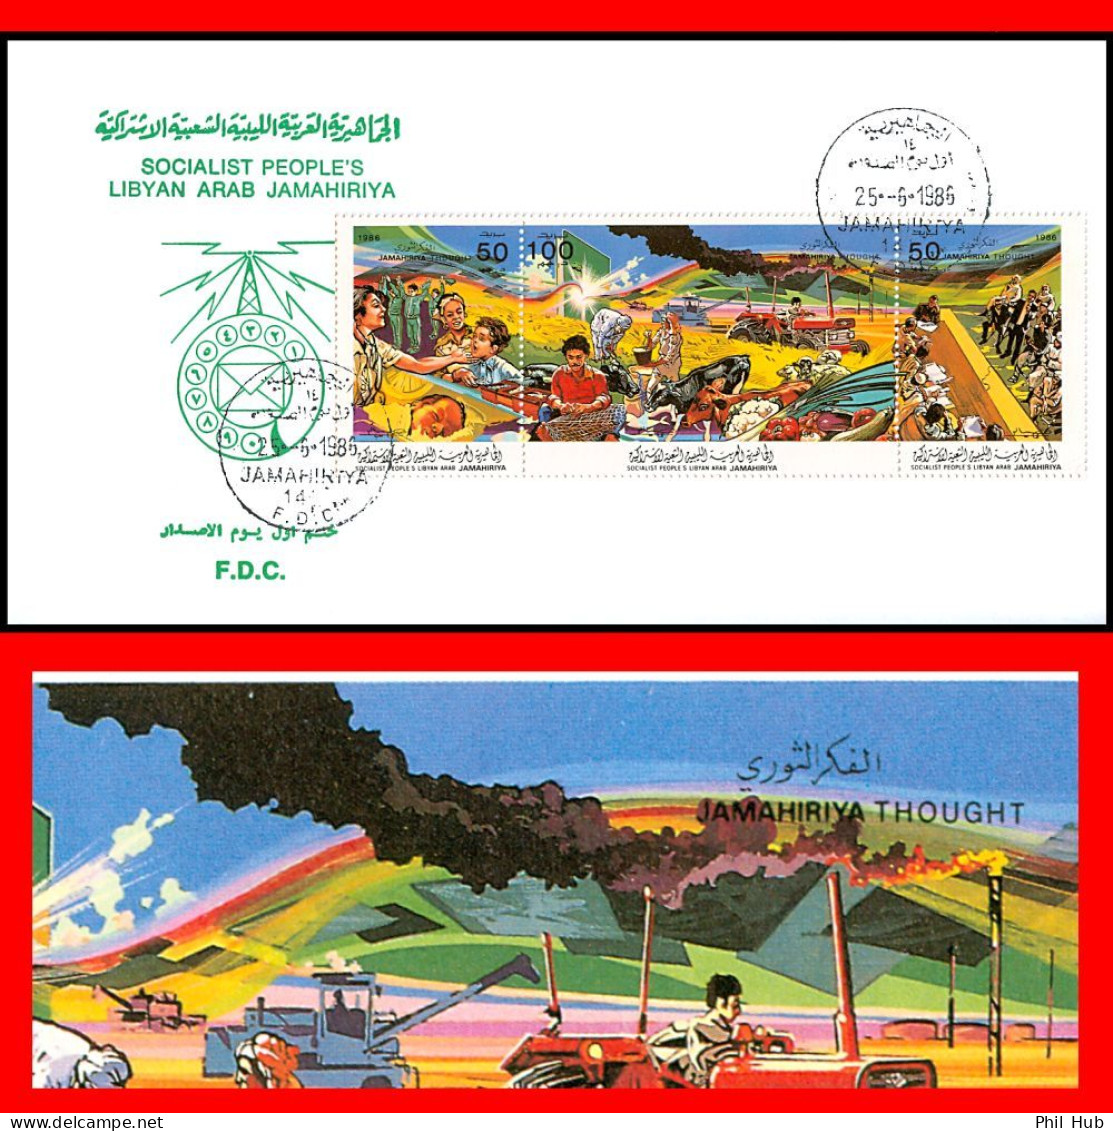 LIBYA 1986 Jamahiriya Thought With Petroleum Oil OPEC Related Health Agriculture Farming Vegetables (FDC) - Libye